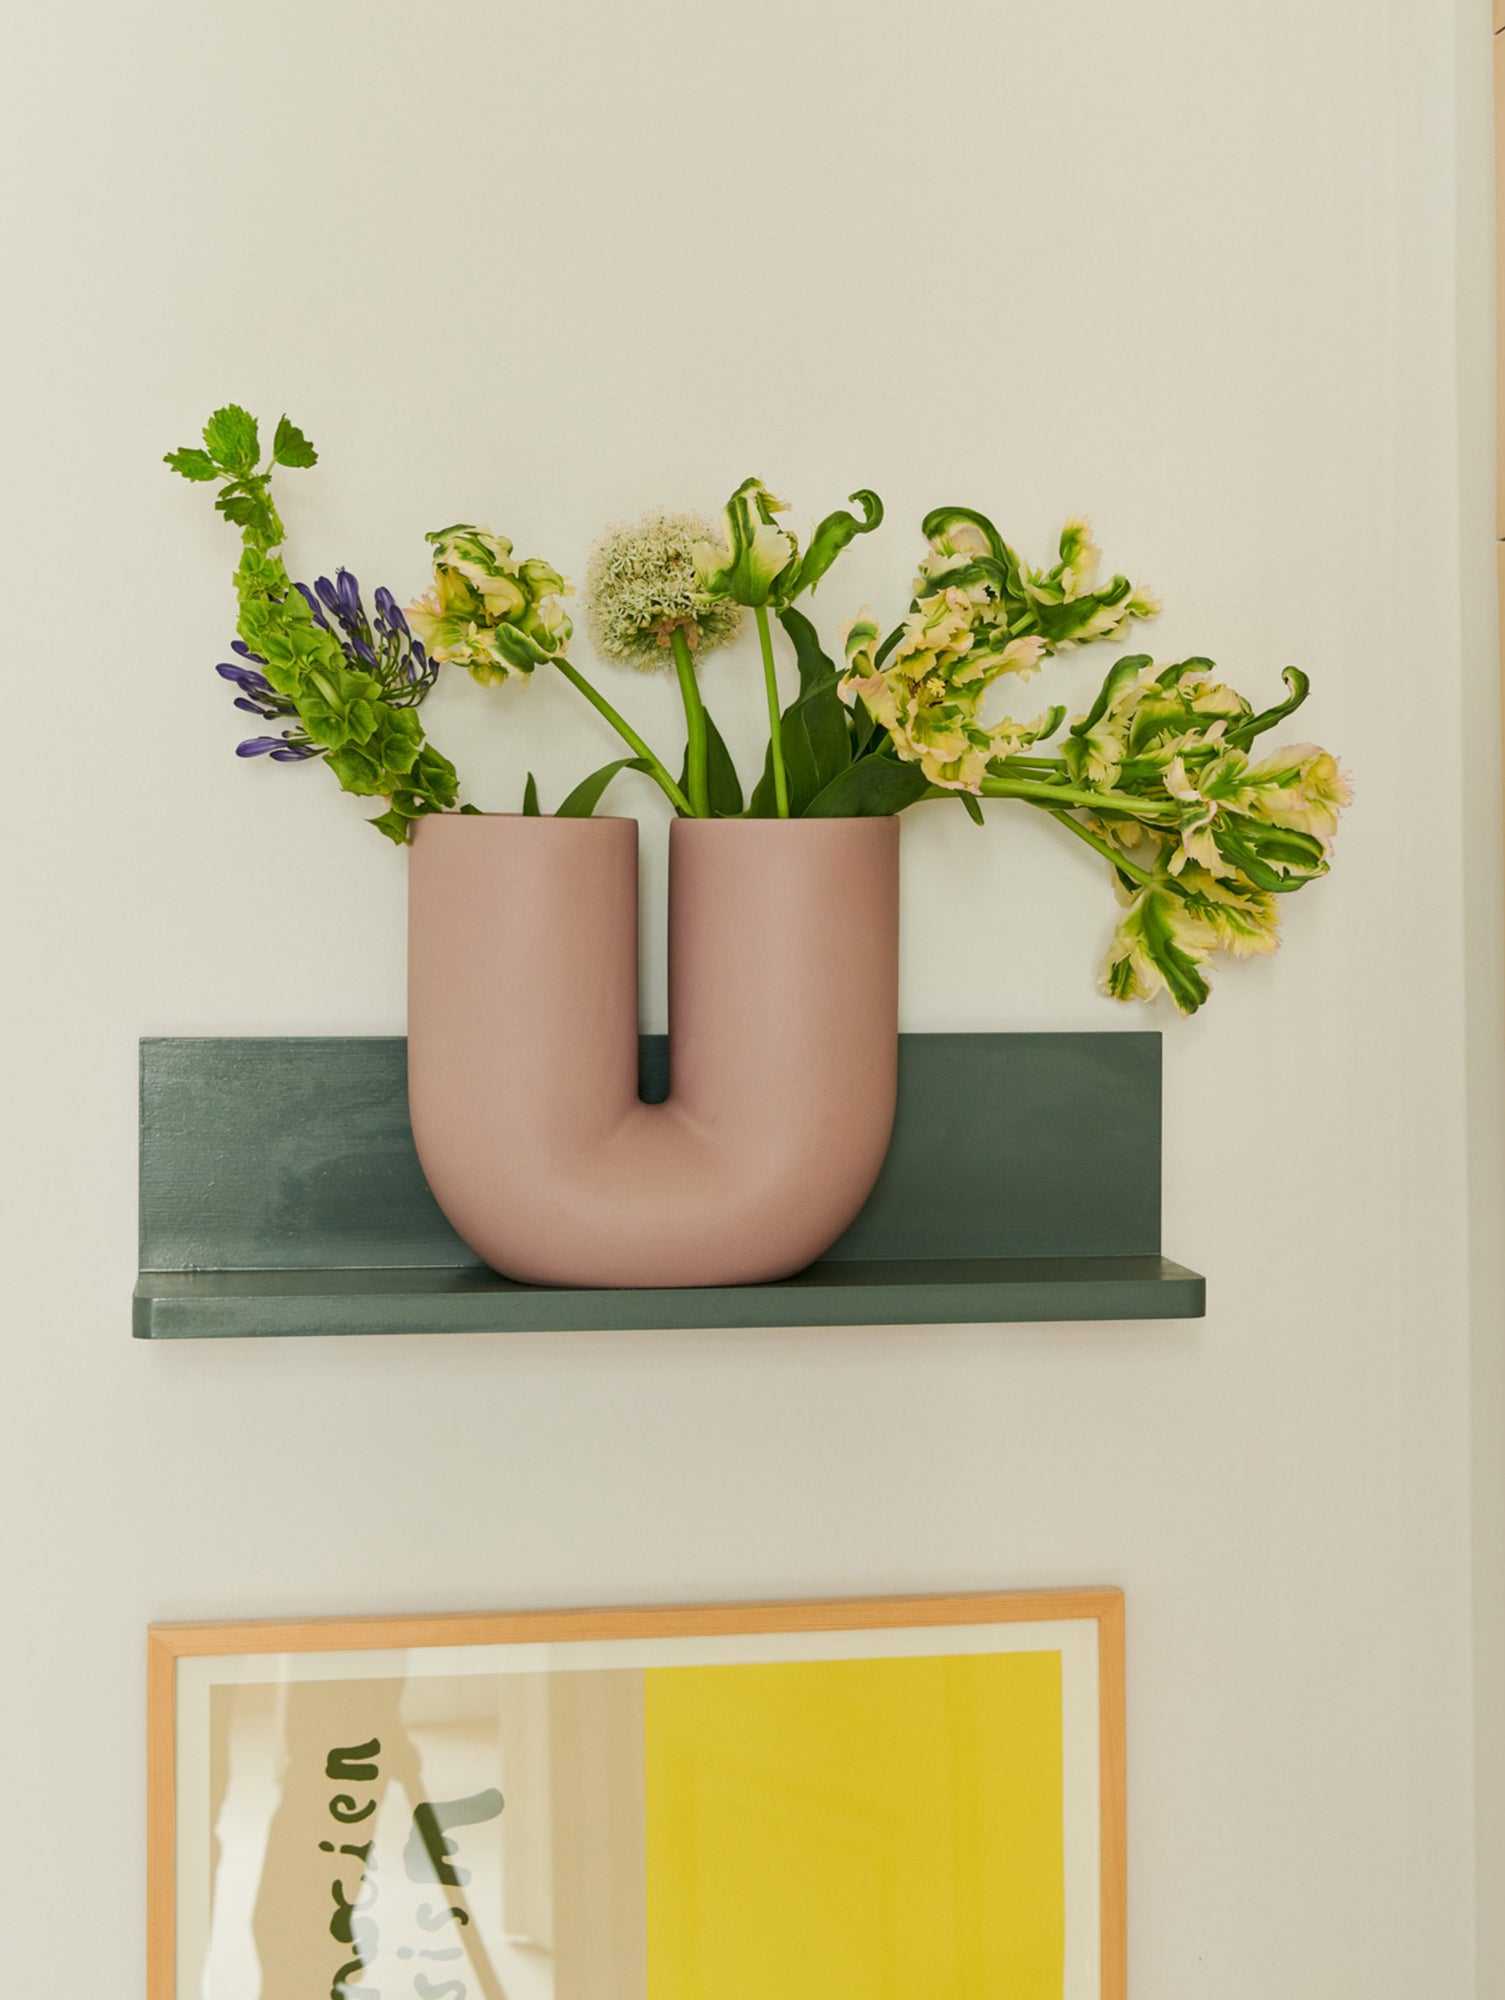 Kink Vase by Muuto – Really Well Made